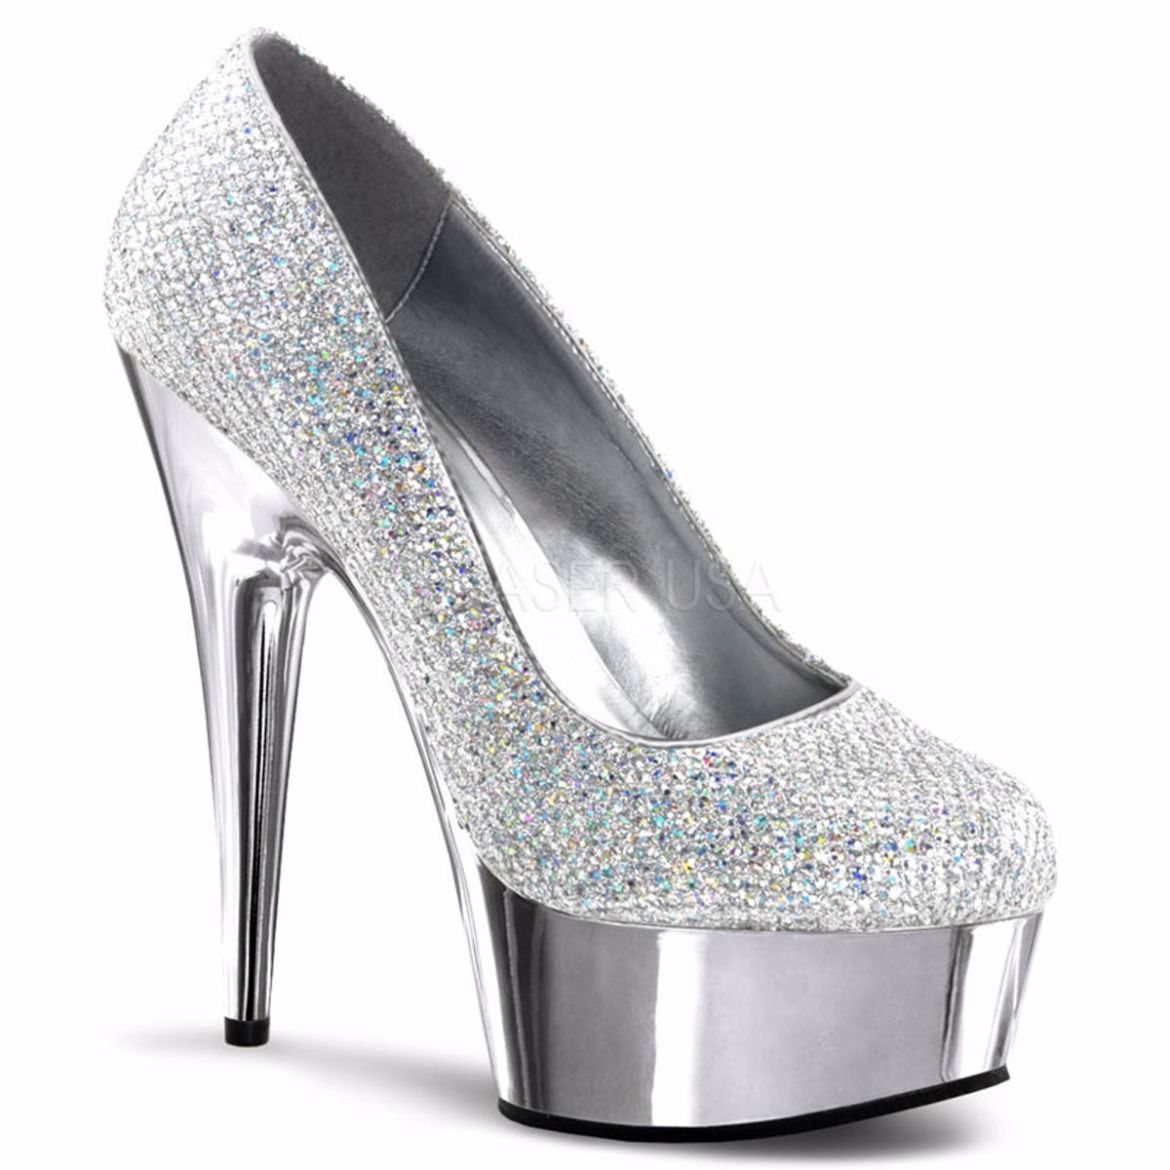 Product image of Pleaser Delight-685G Silver Multi Glitter/Silver Chrome, 6 inch (15.2 cm) Heel, 1 3/4 inch (4.4 cm) Platform Court Pump Shoes